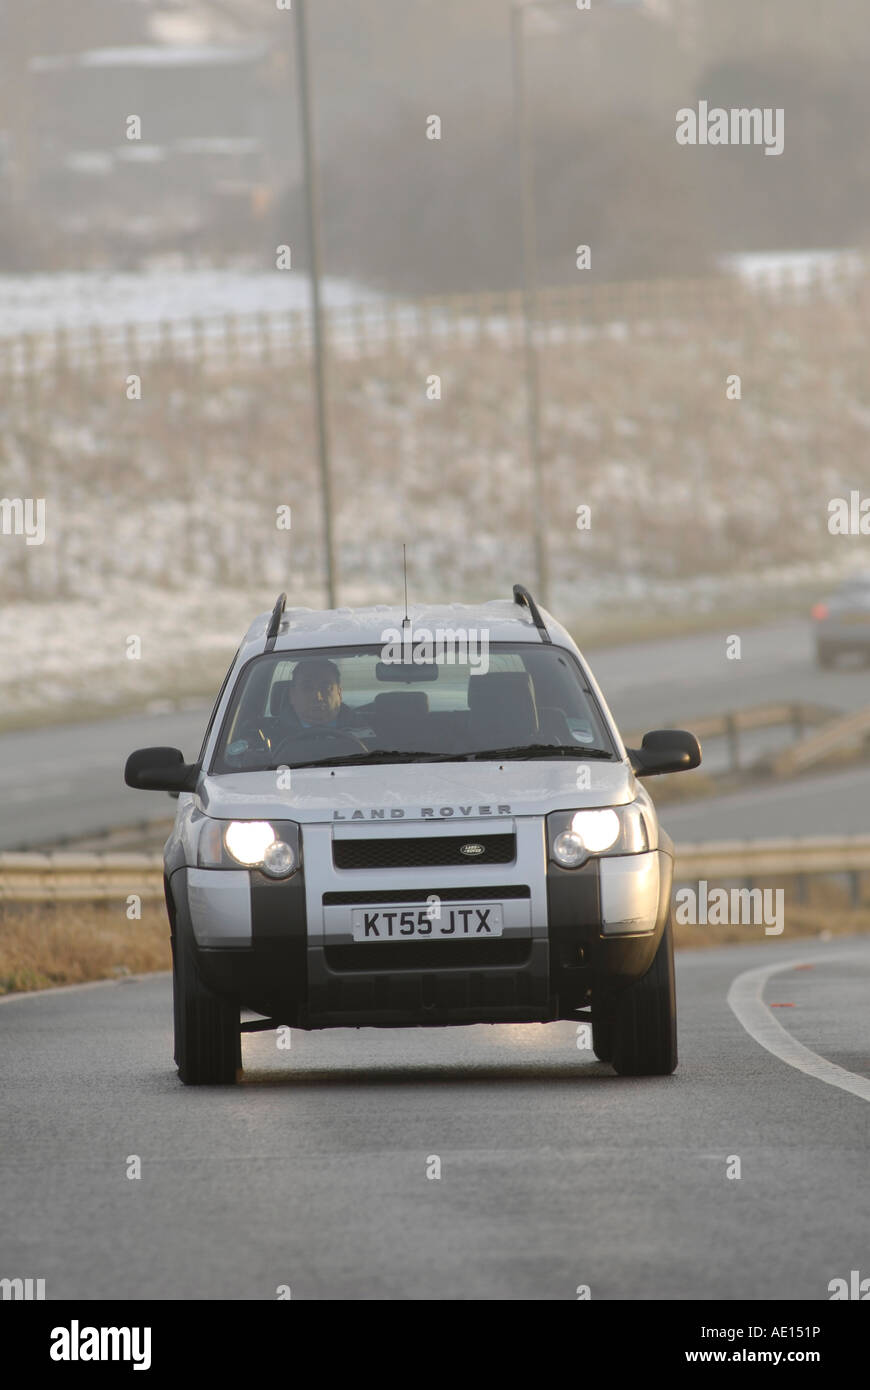 Land Rover Freelander car driving along on a slip road in the uk Stock Photo